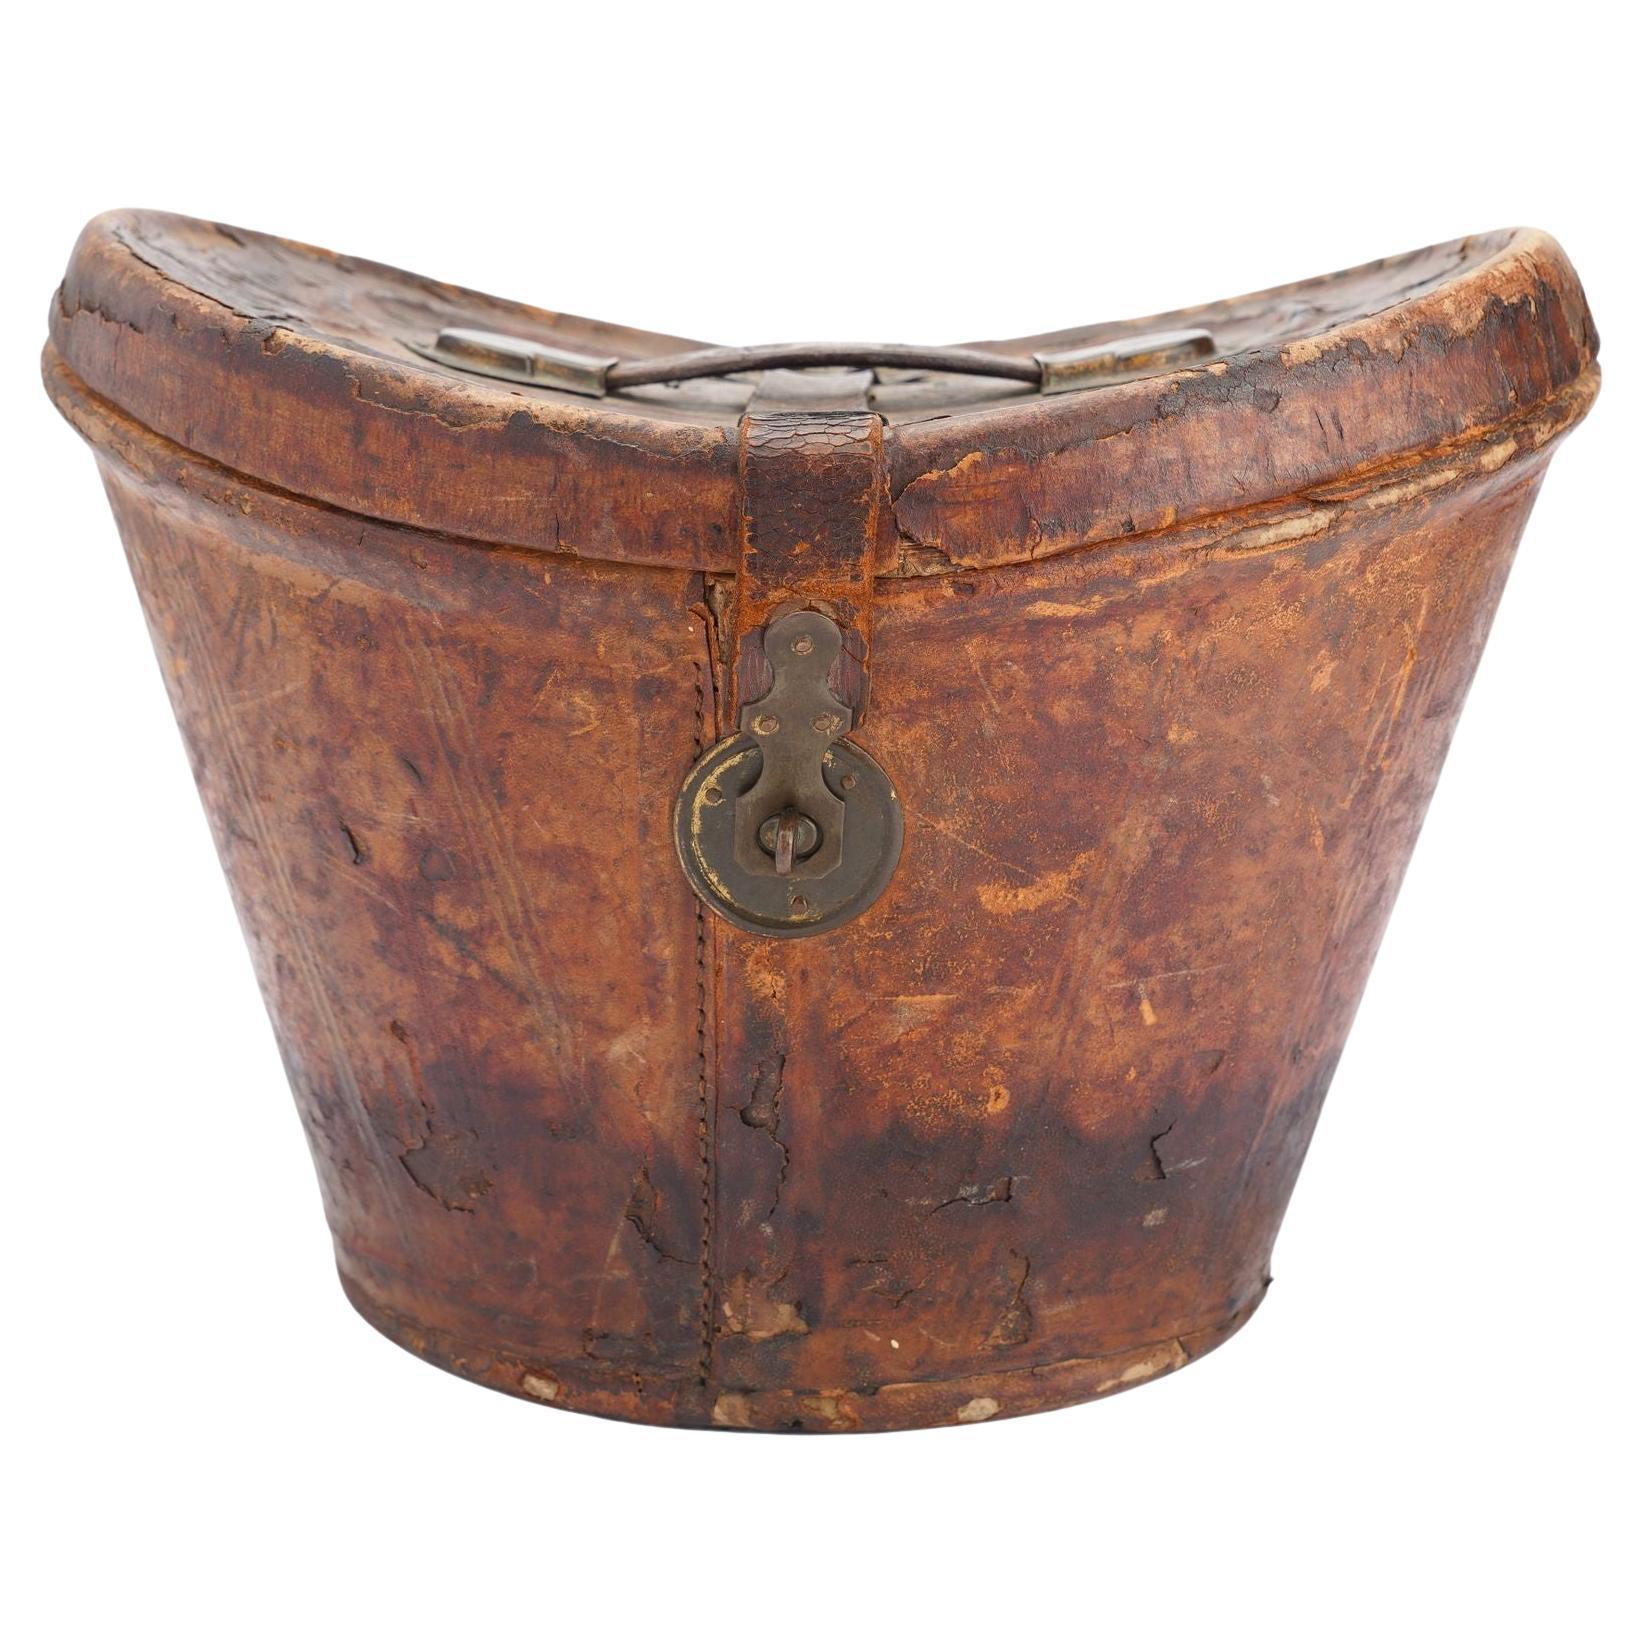 English leather hat box for a man’s wide brim top hat, 1830-40